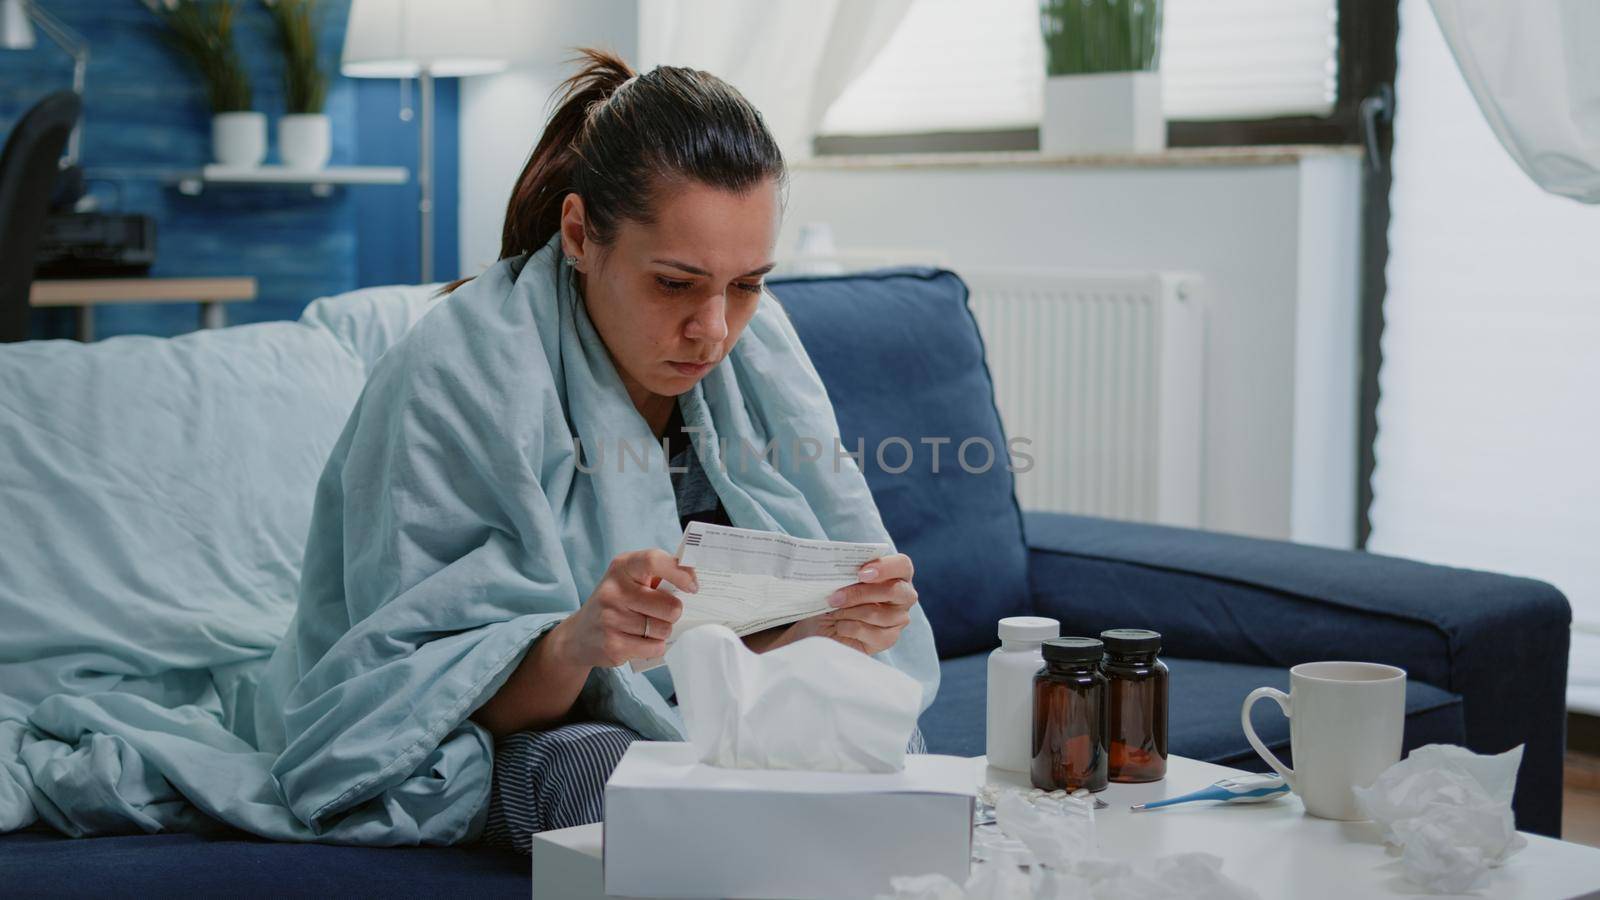 Person with disease infection analyzing package leaflet of pill bottles to cure illness. Woman feeling cold reading medical paper with medication instructions, having medicaments on table